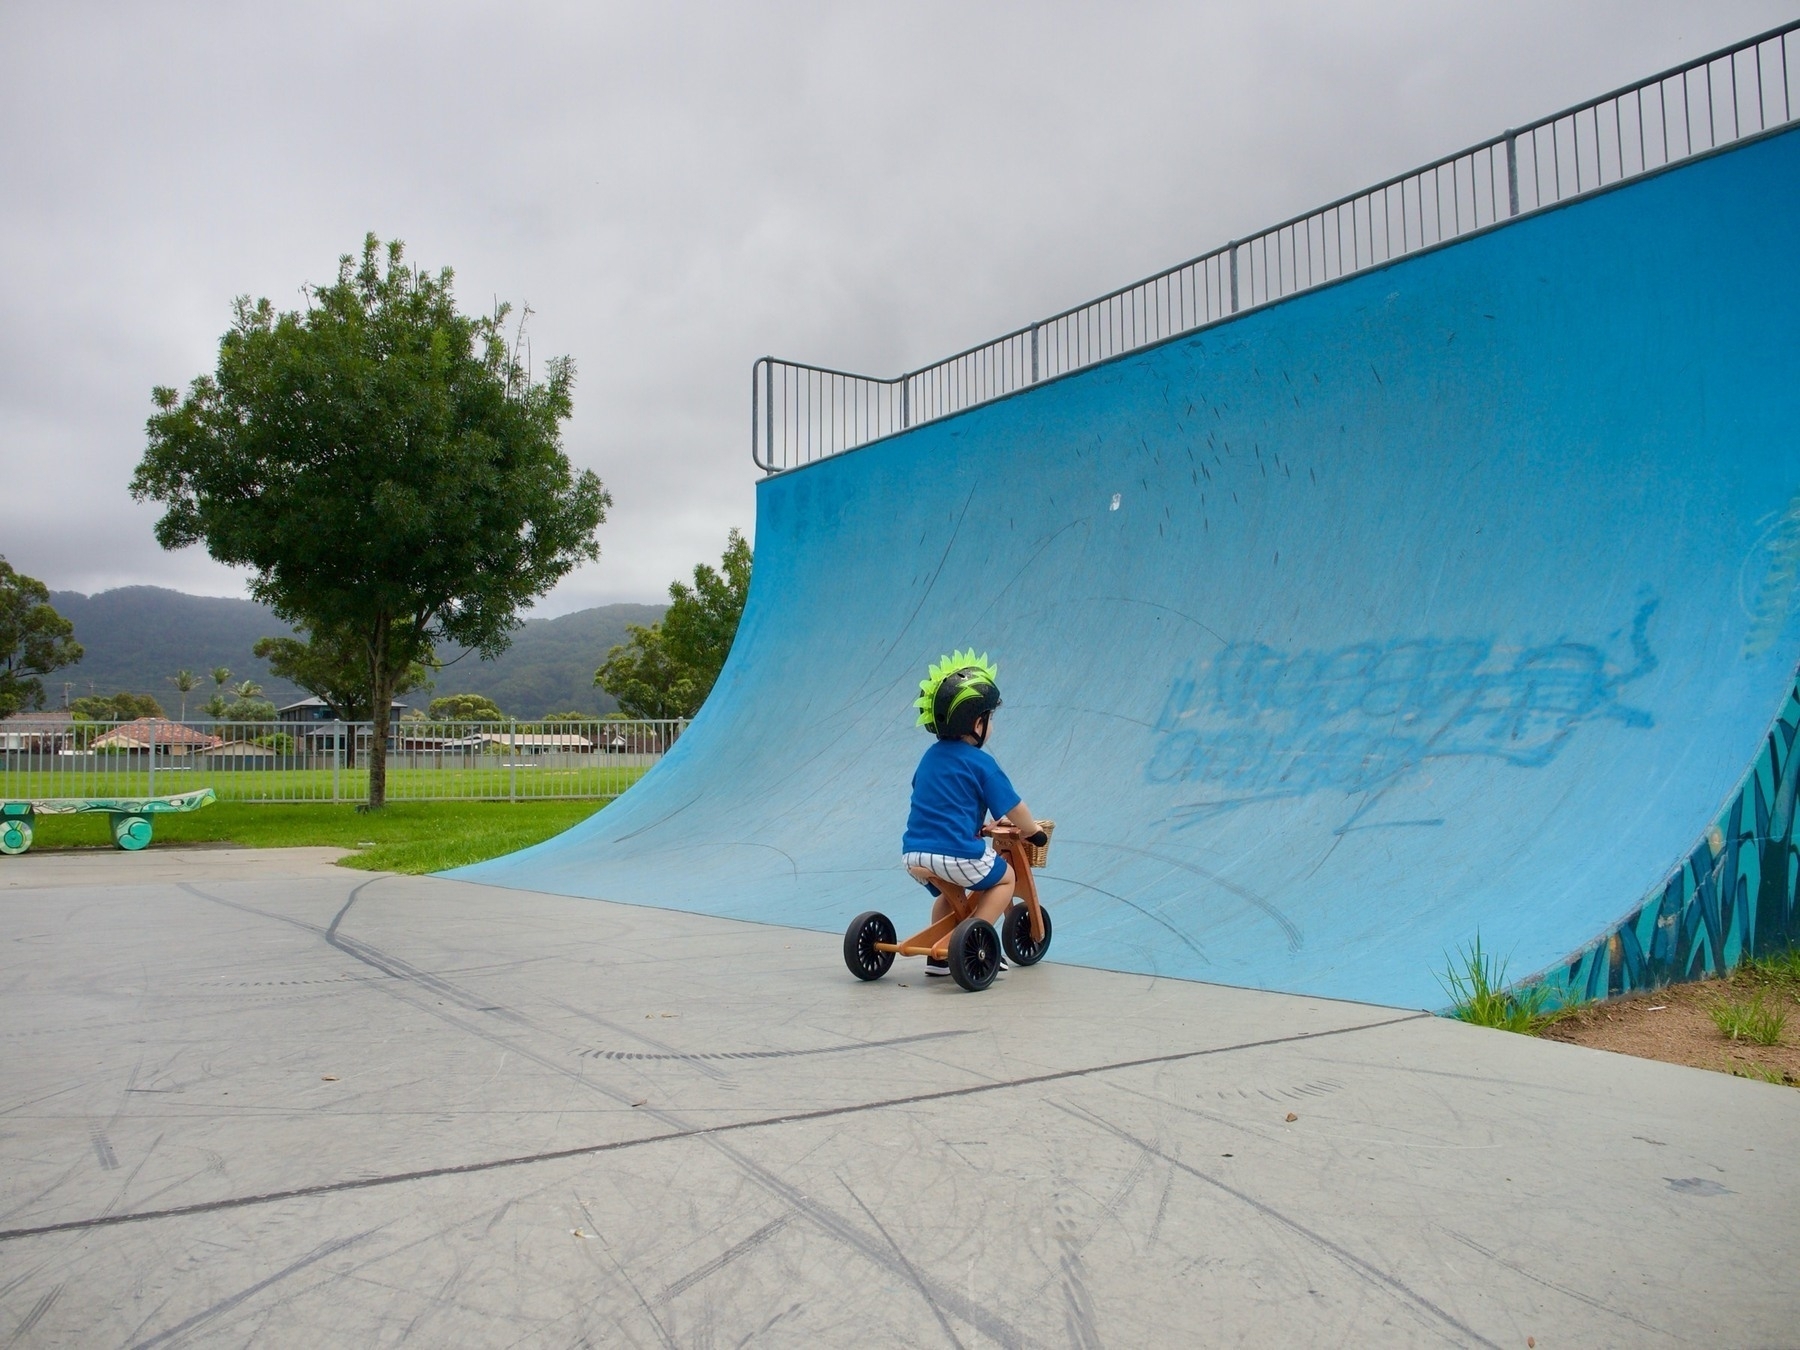 A young boy rides a trike into a half pipe.